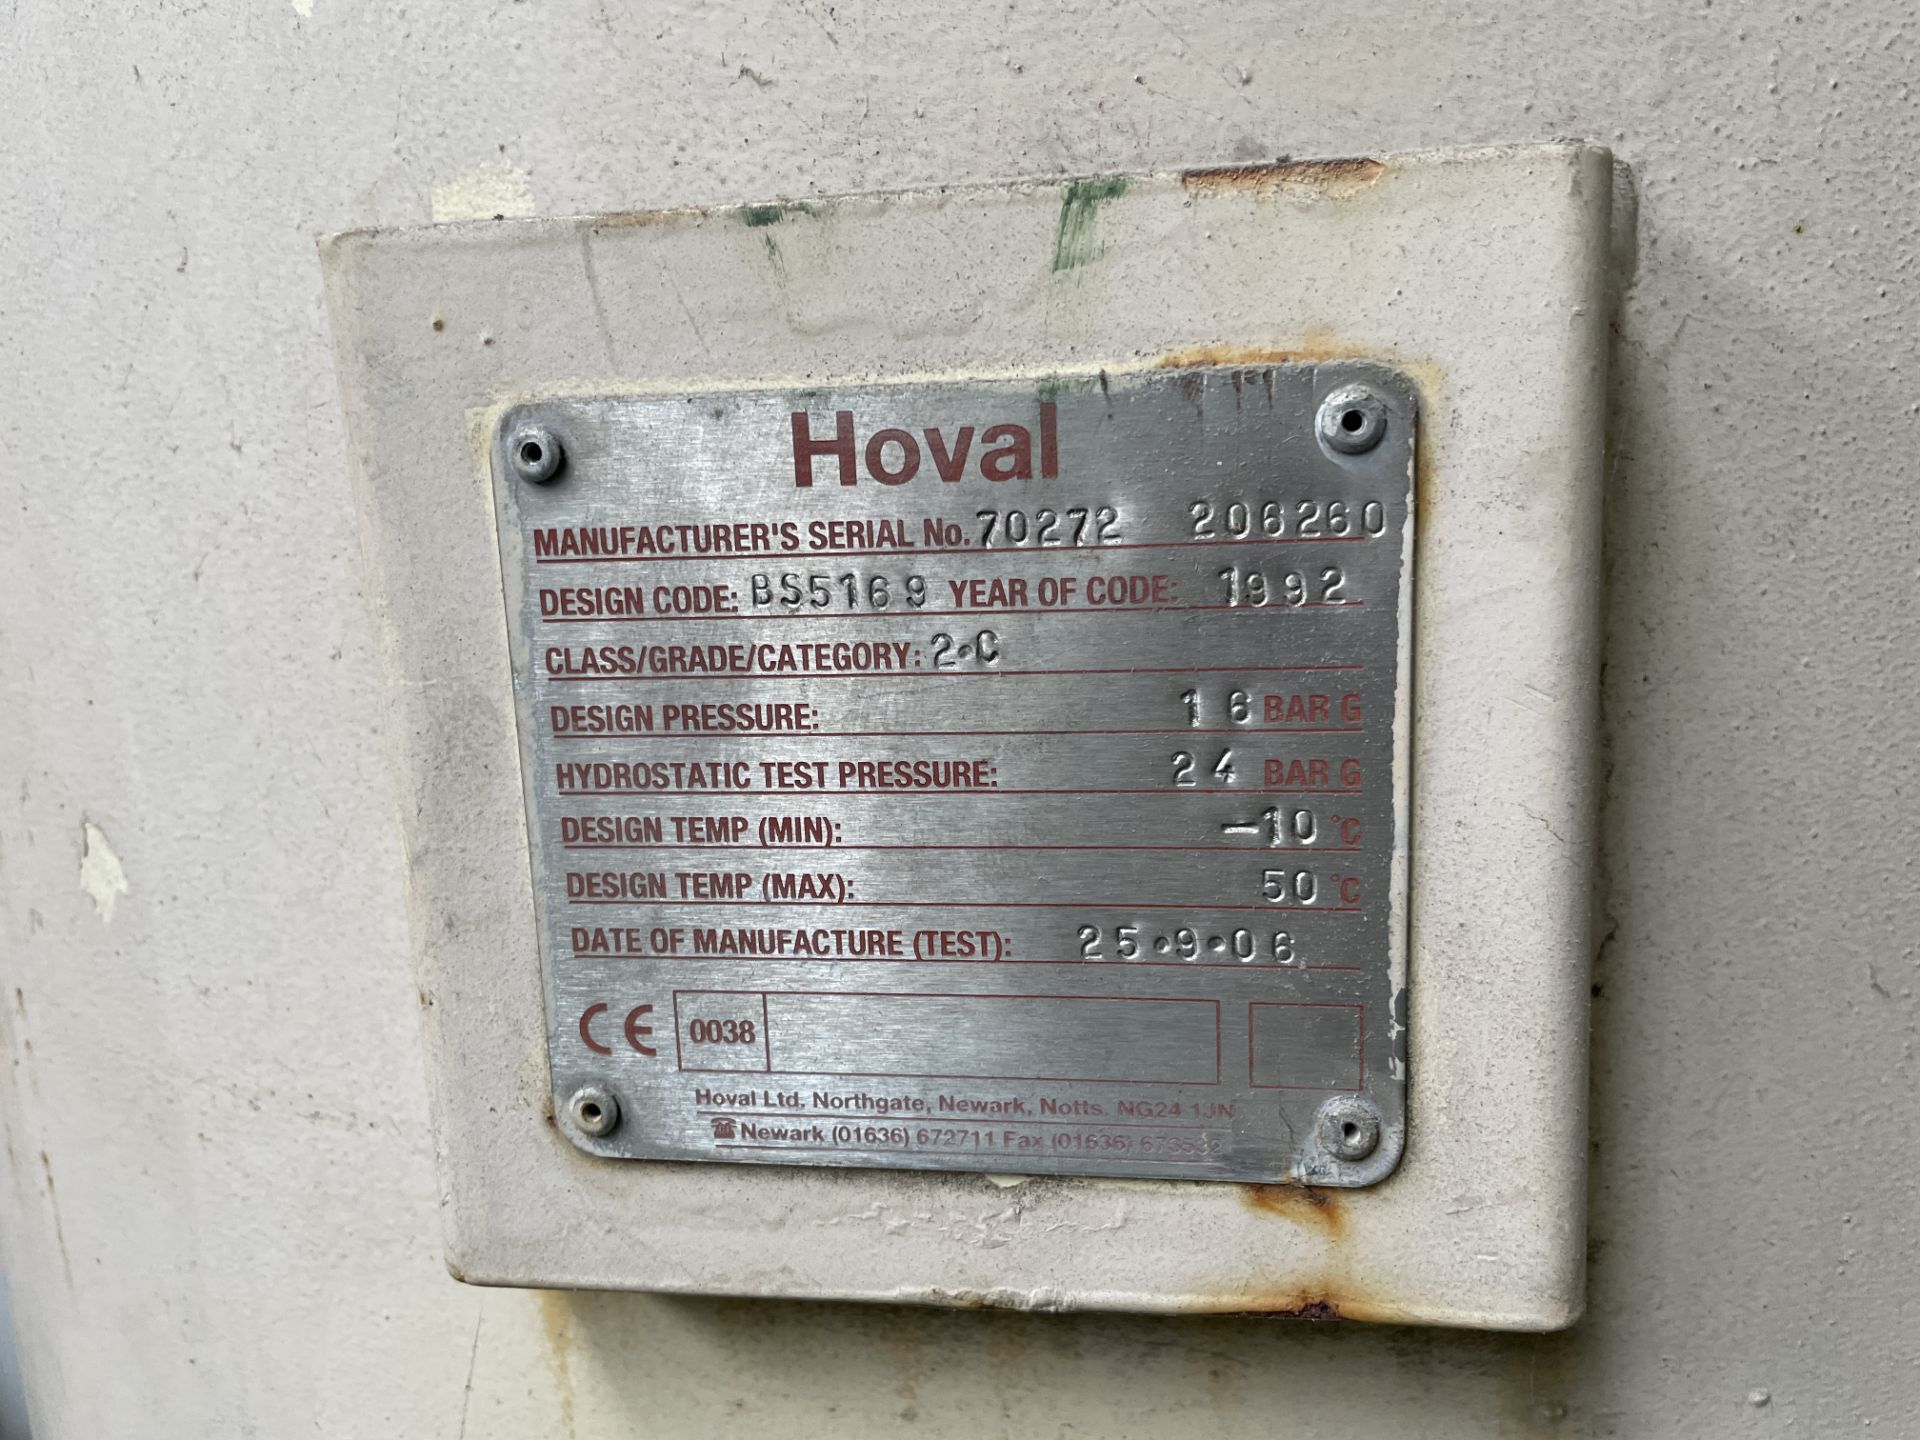 Hoval Vertical Welded Air Receiver, serial no. 70272 206260, year of manufacture 2006, 16 bar design - Image 2 of 2